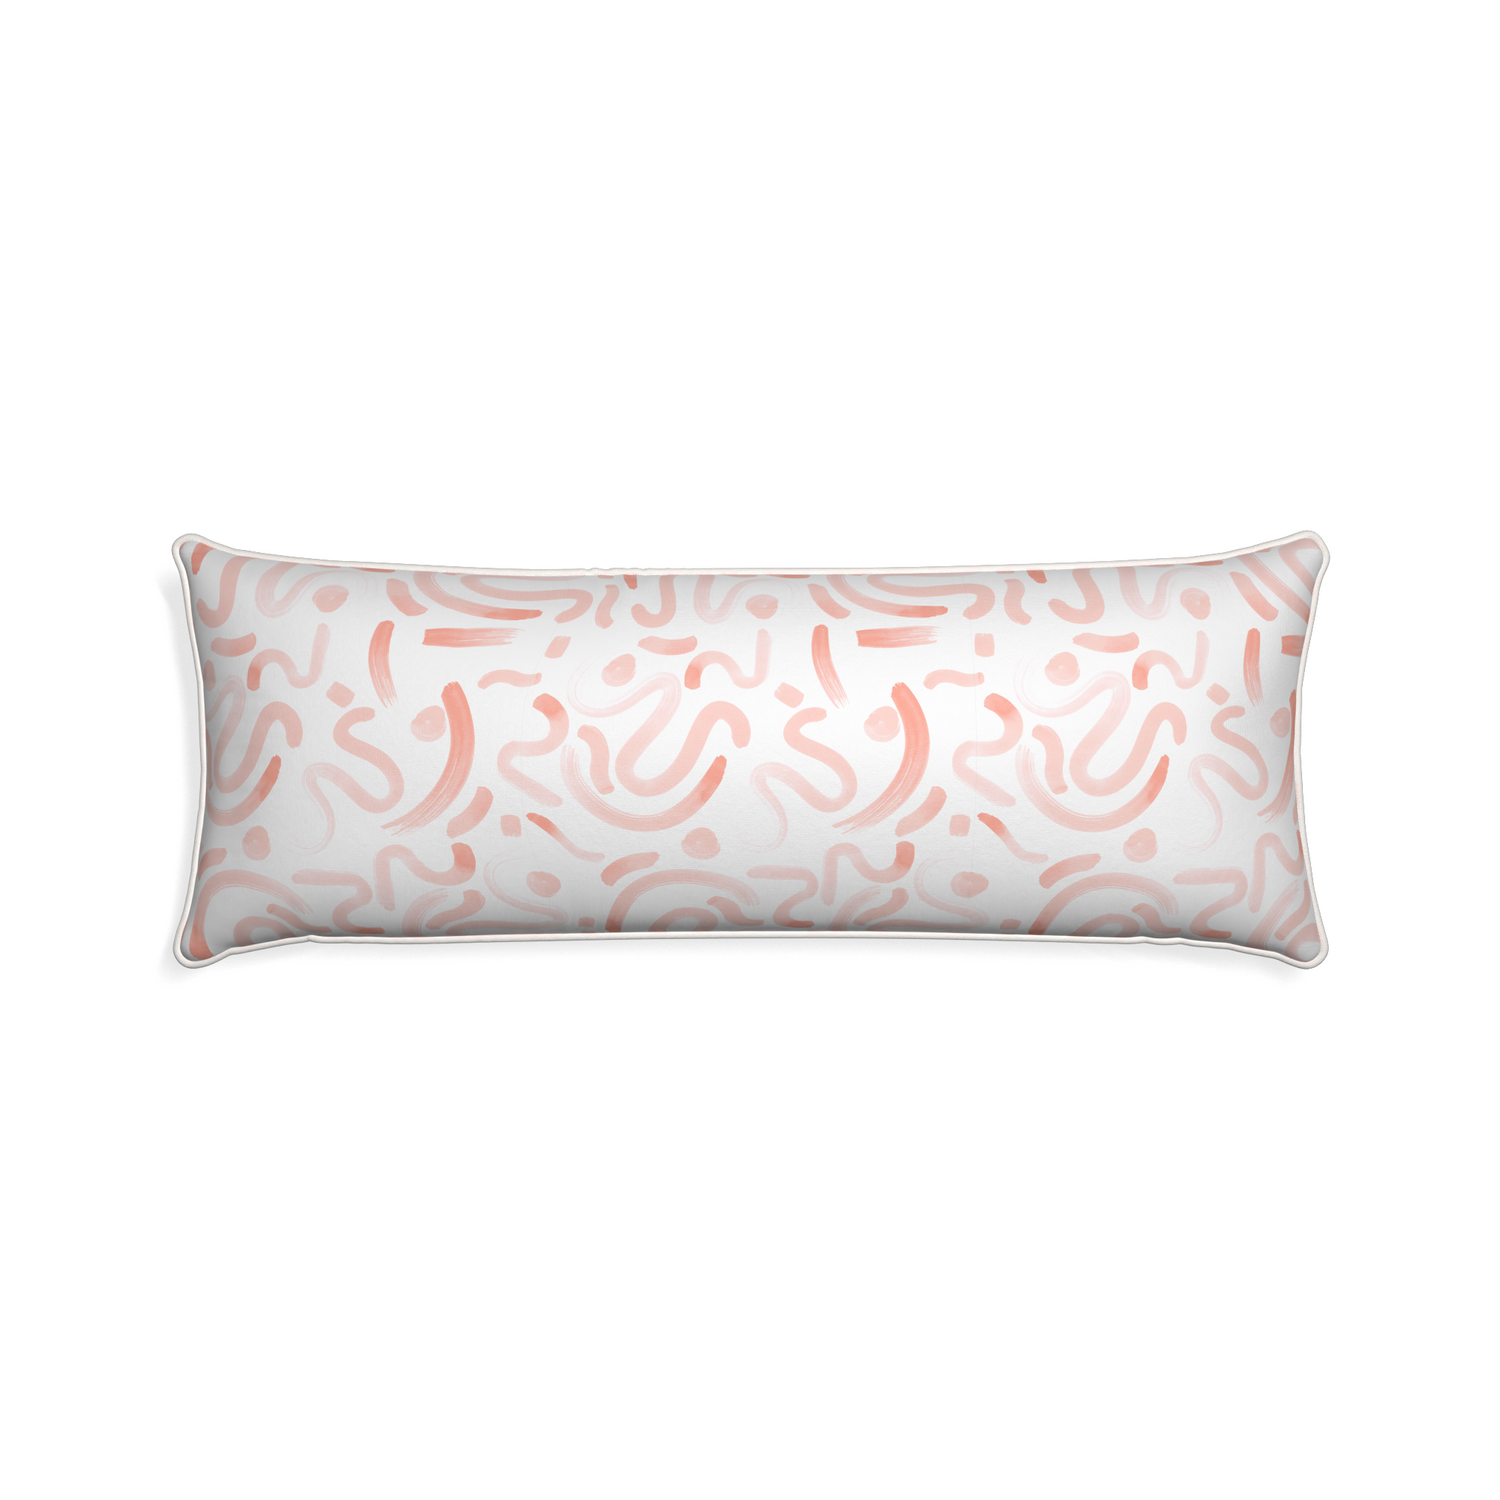 Xl-lumbar hockney pink custom pink graphicpillow with snow piping on white background